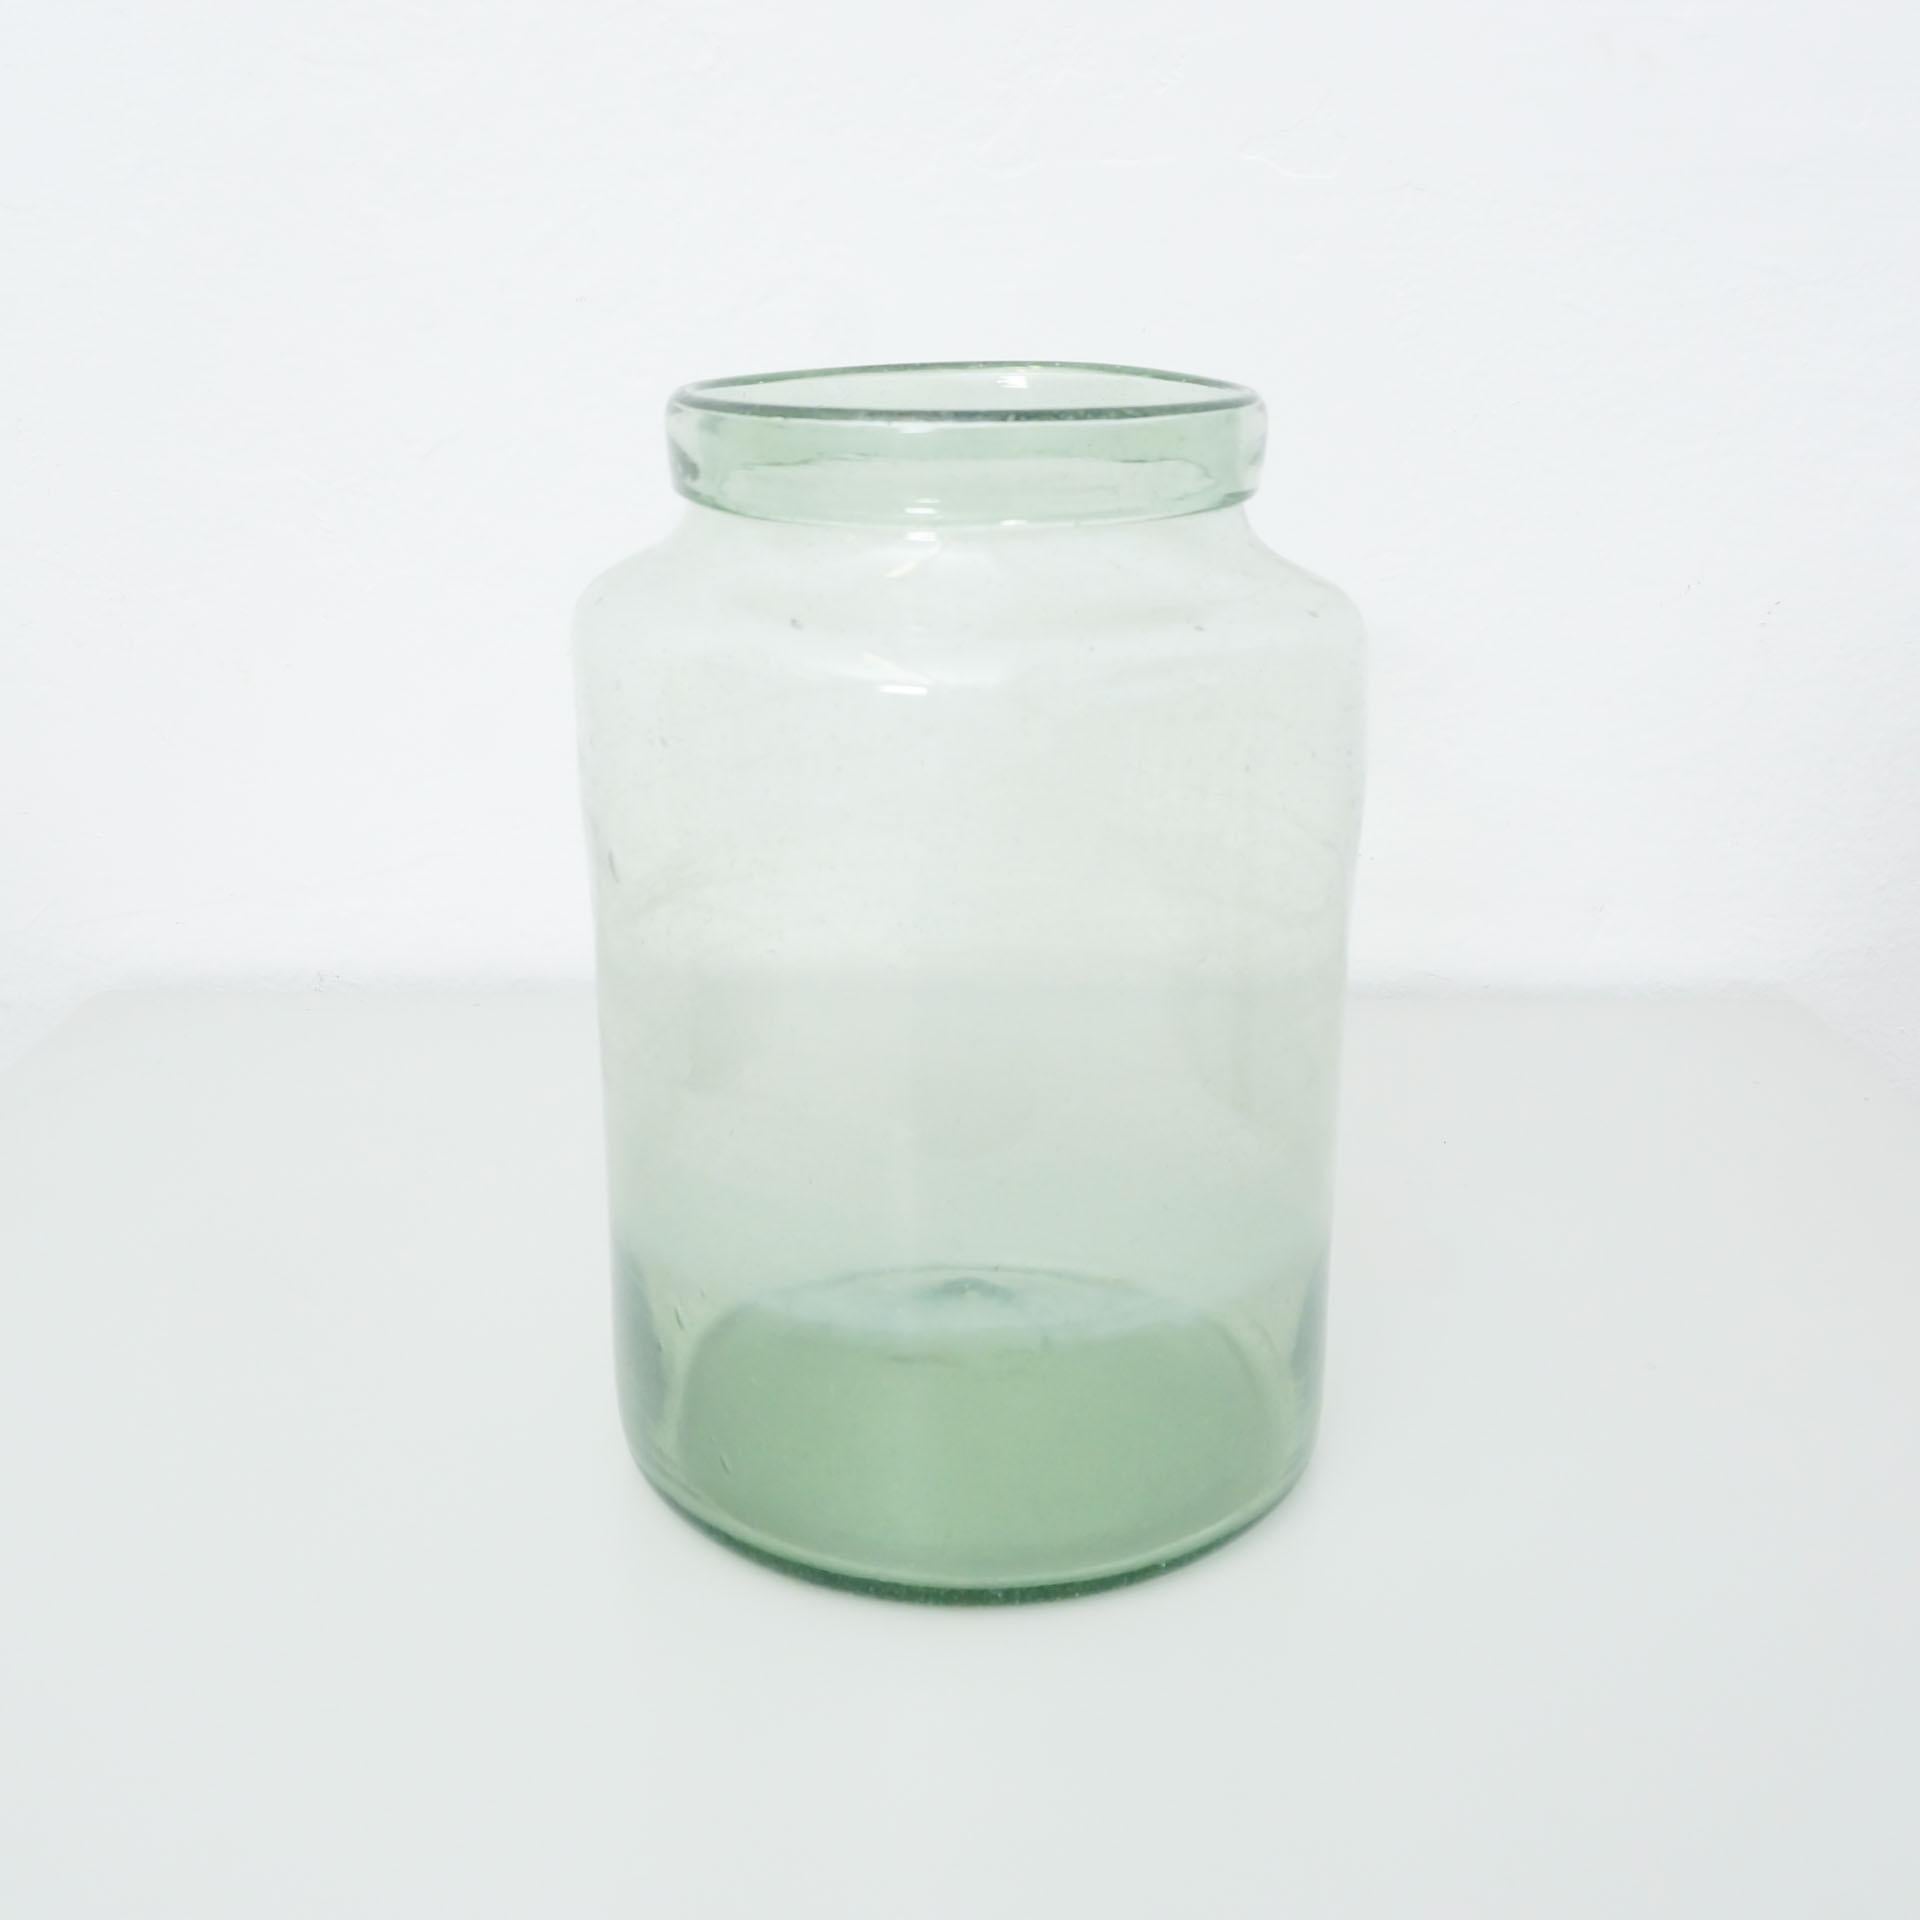 Blown glass jar, circa 1920.
By unknown manufacturer, from France.

In original condition, with some visible signs of previous use and age, preserving a beautiful patina.

Materials:
Blown glass

Dimensions:
ø 20 cm x H 30 cm.